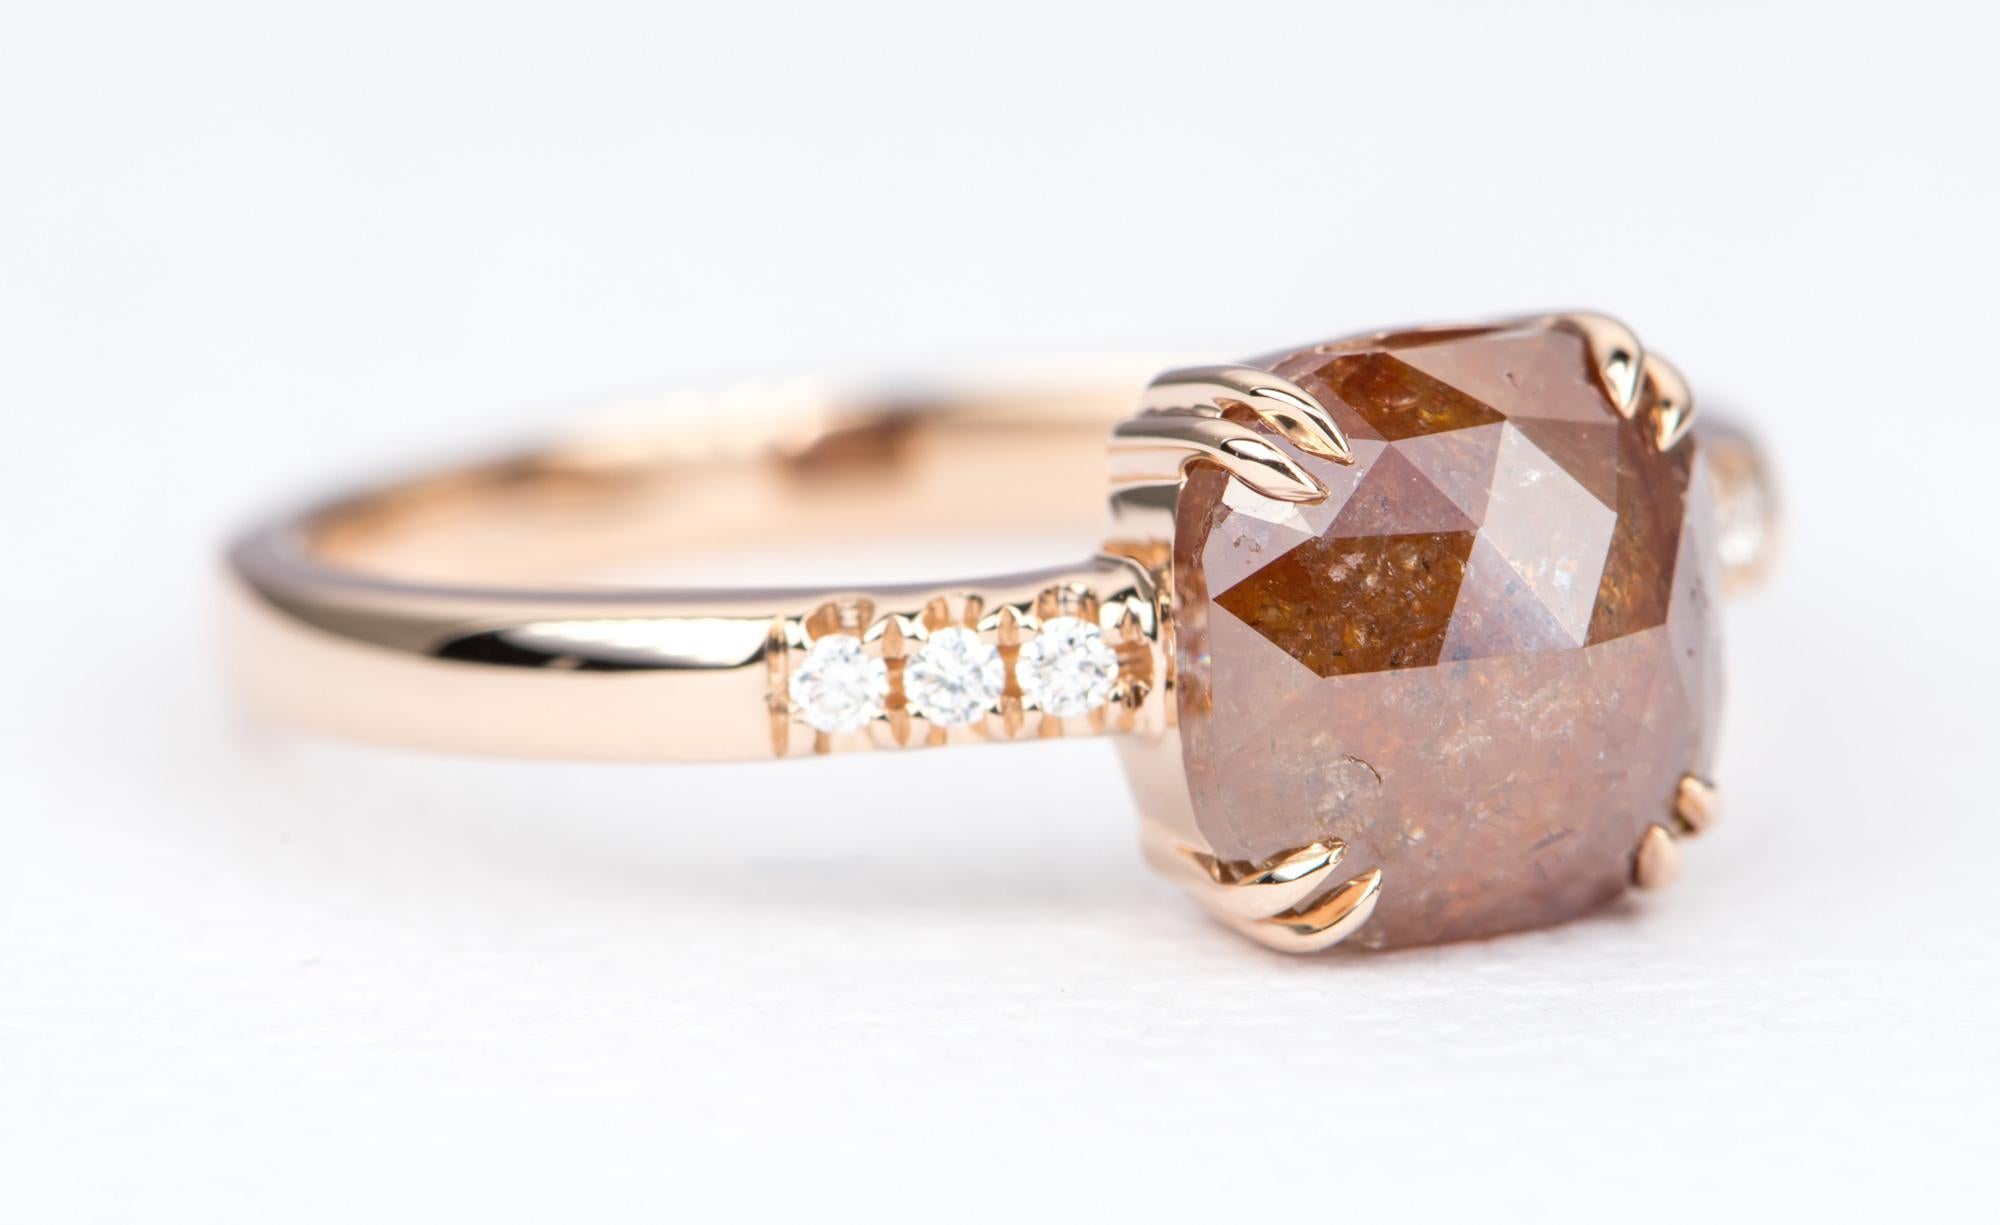 ♥  A stunning reddish  brown diamond is set on a solid 14k rose gold setting with double prongs at the corners of the setting.
♥  The shank has brilliant cut colorless diamonds on each side. It complements the rustic nature of the center stone